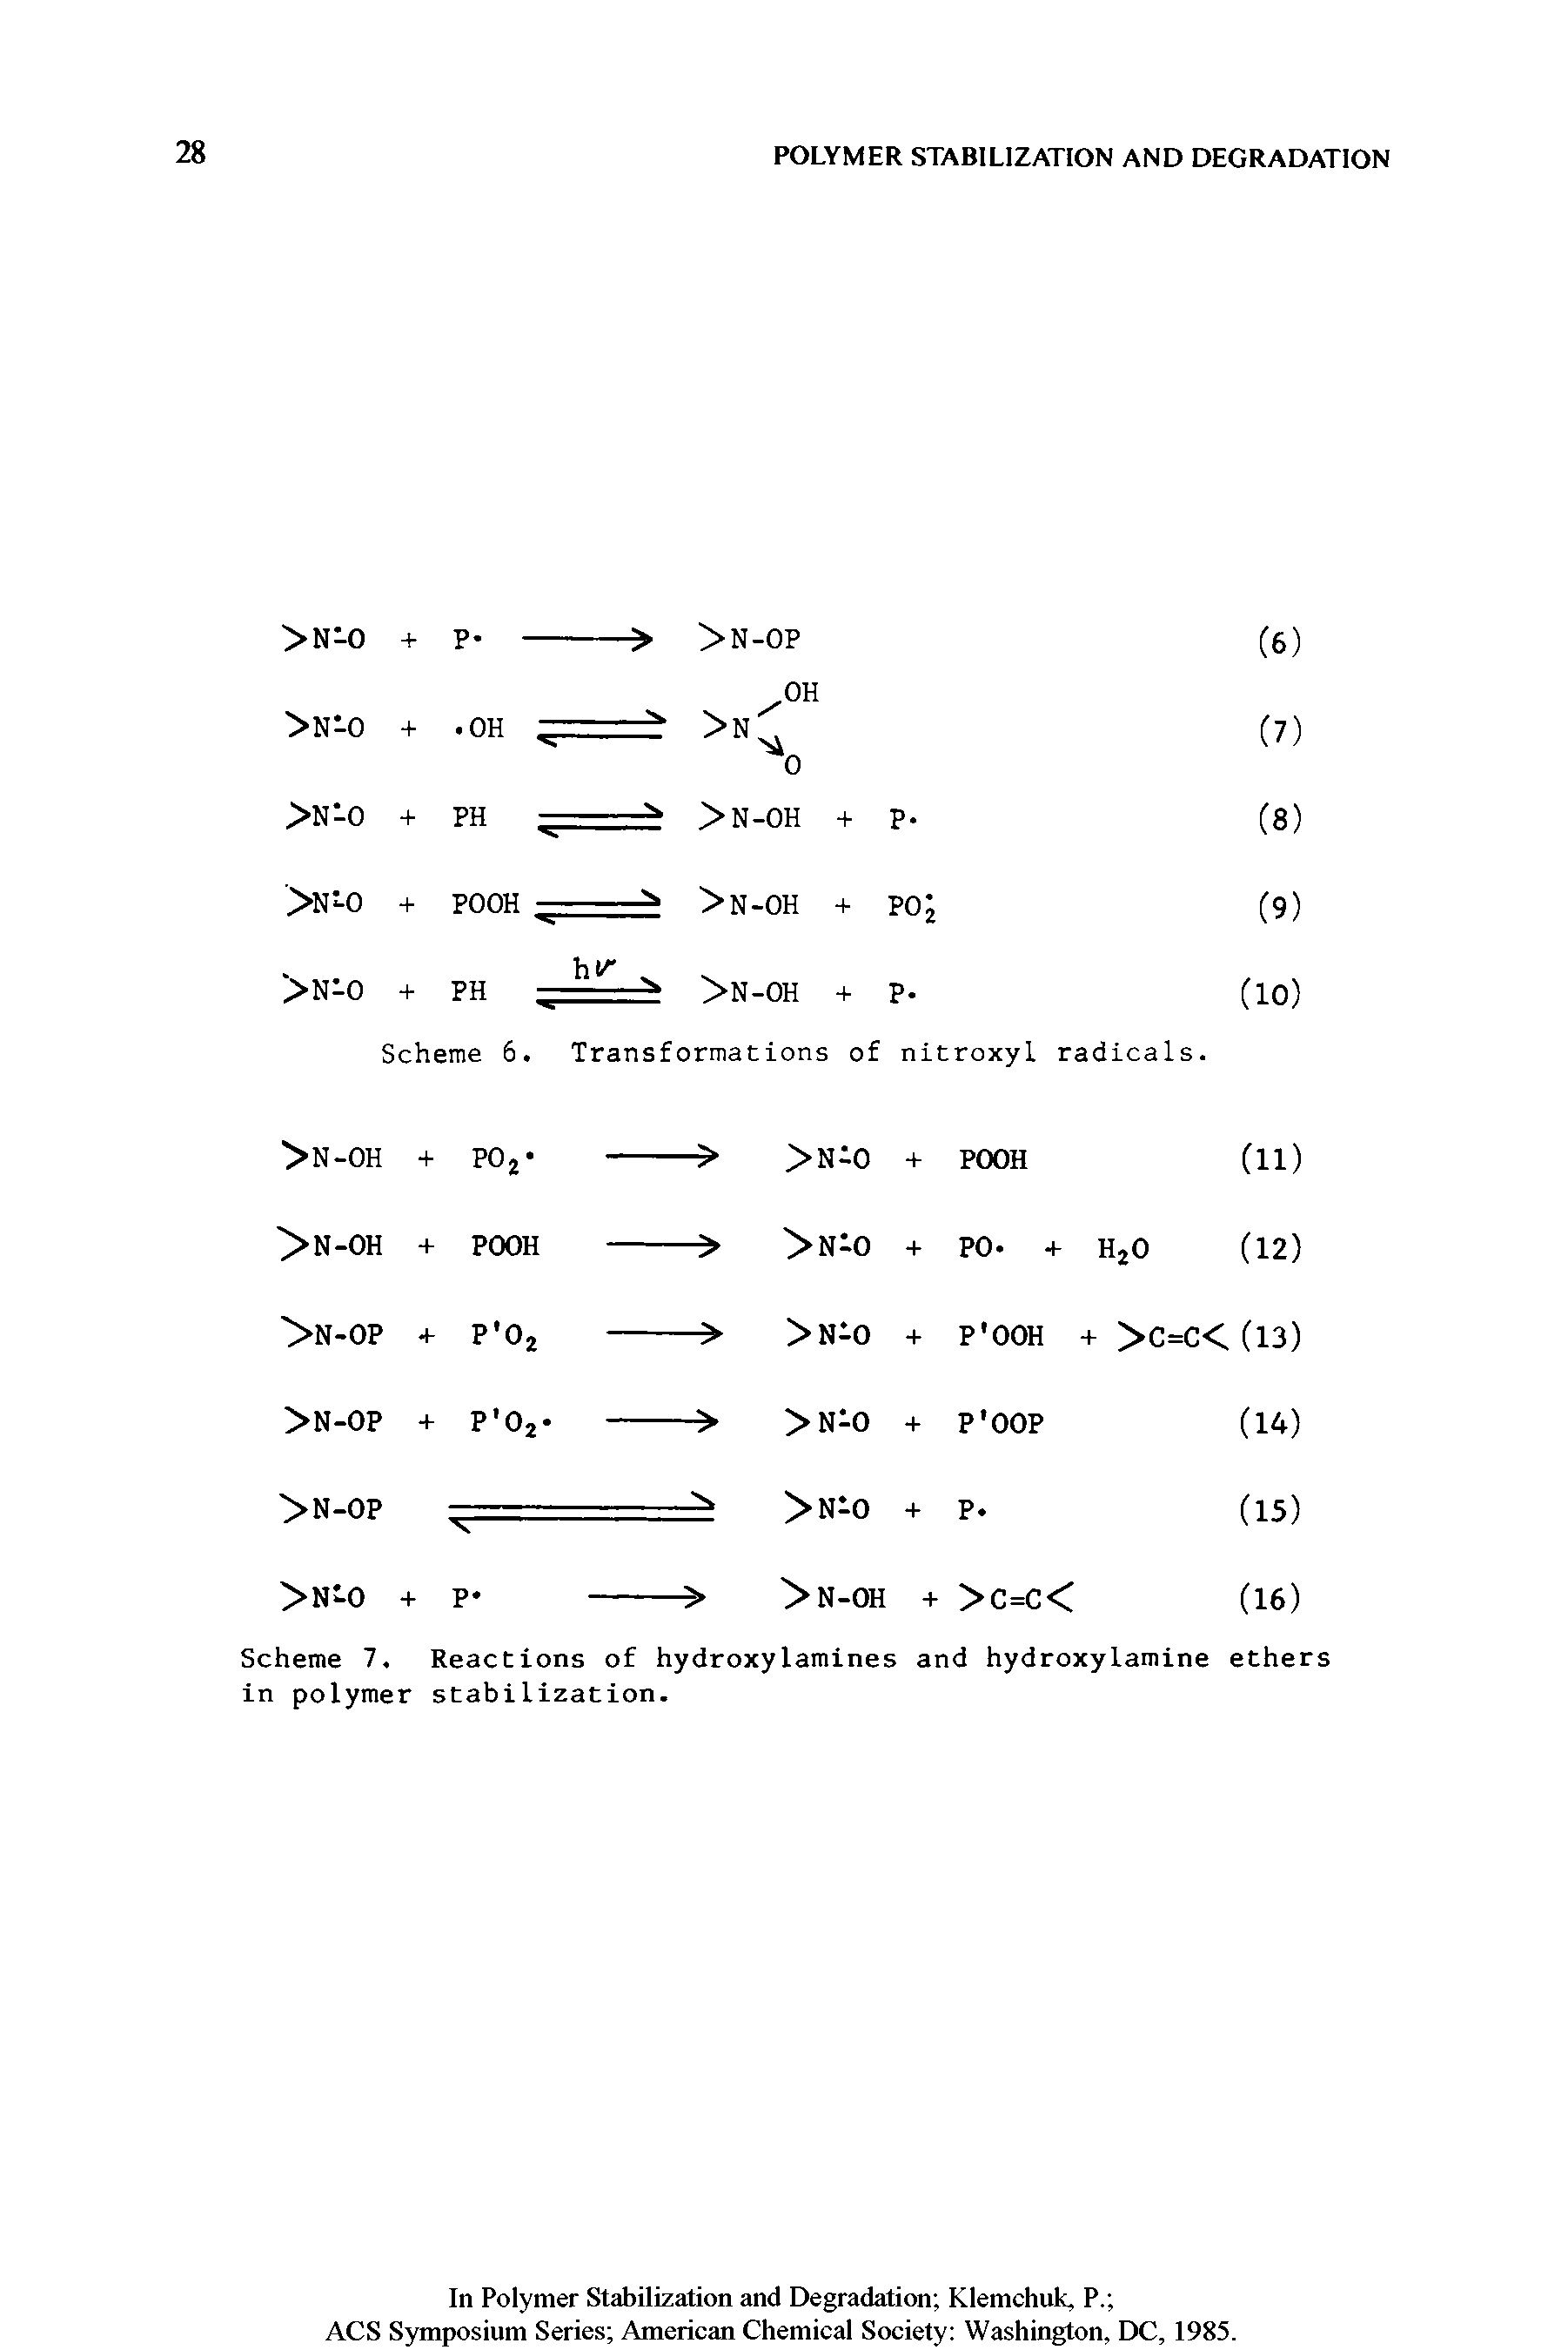 Scheme 7. Reactions of hydroxylamines and hydroxylamine ethers in polymer stabilization.